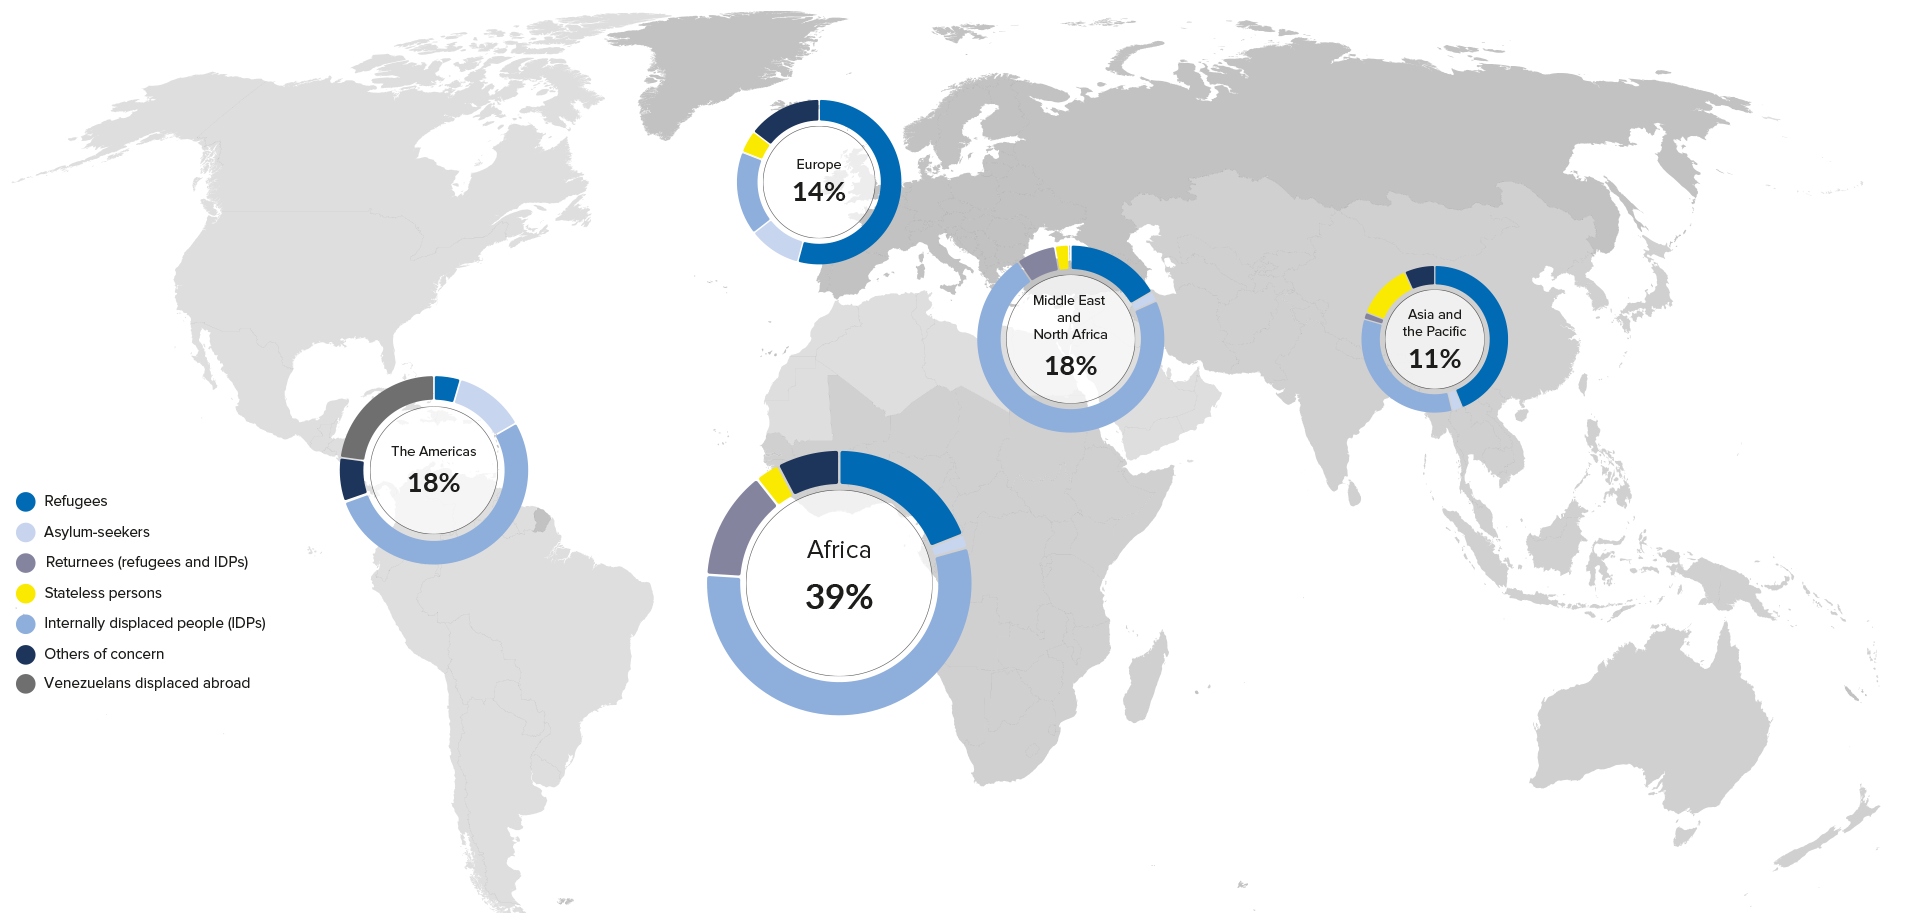 Populations of concern to UNHCR